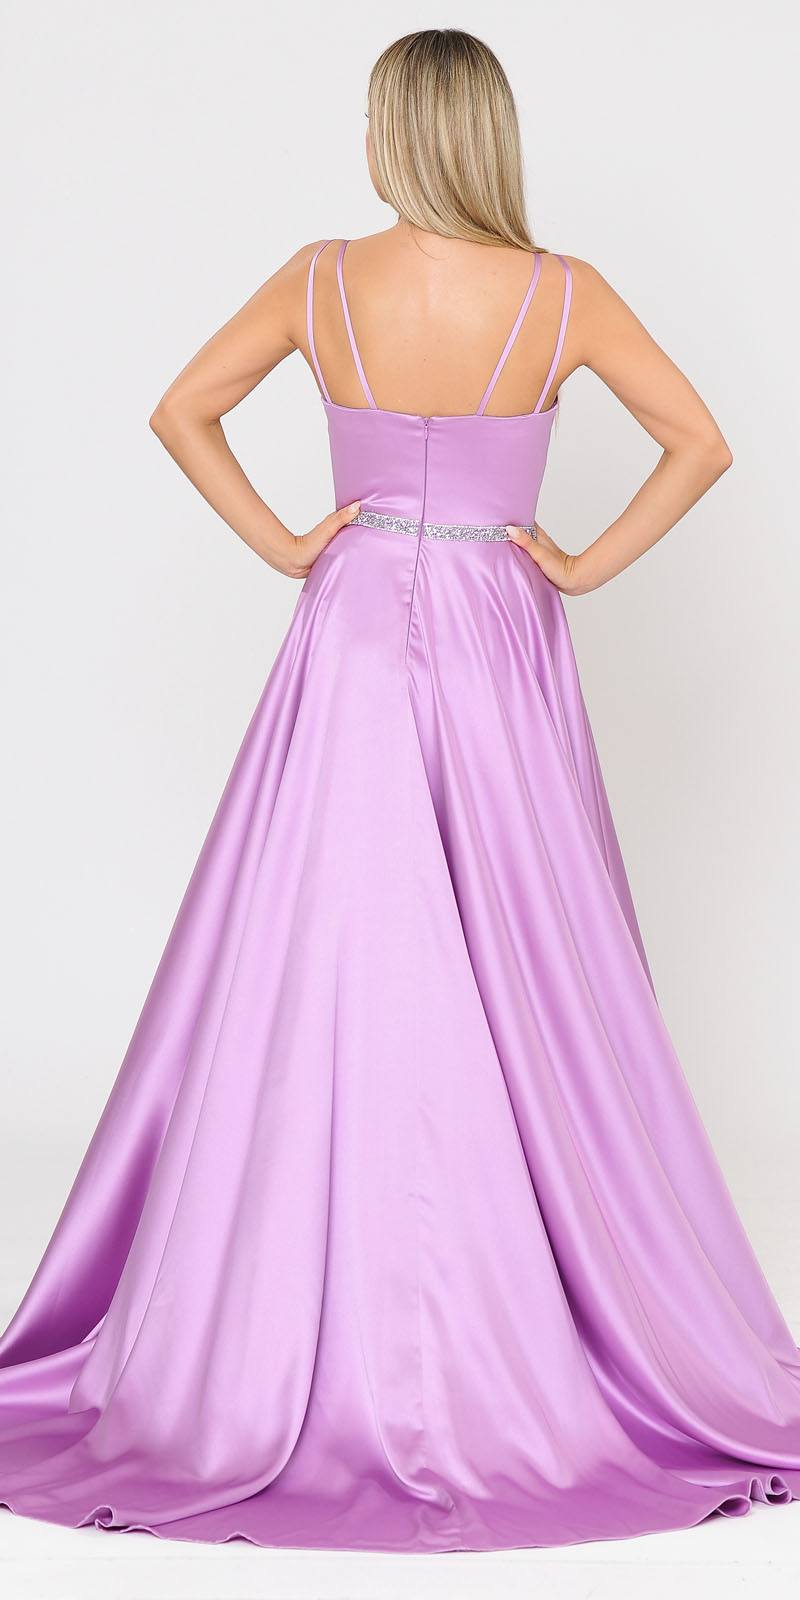 Lilac Romper Style Long Prom Dress with Pockets